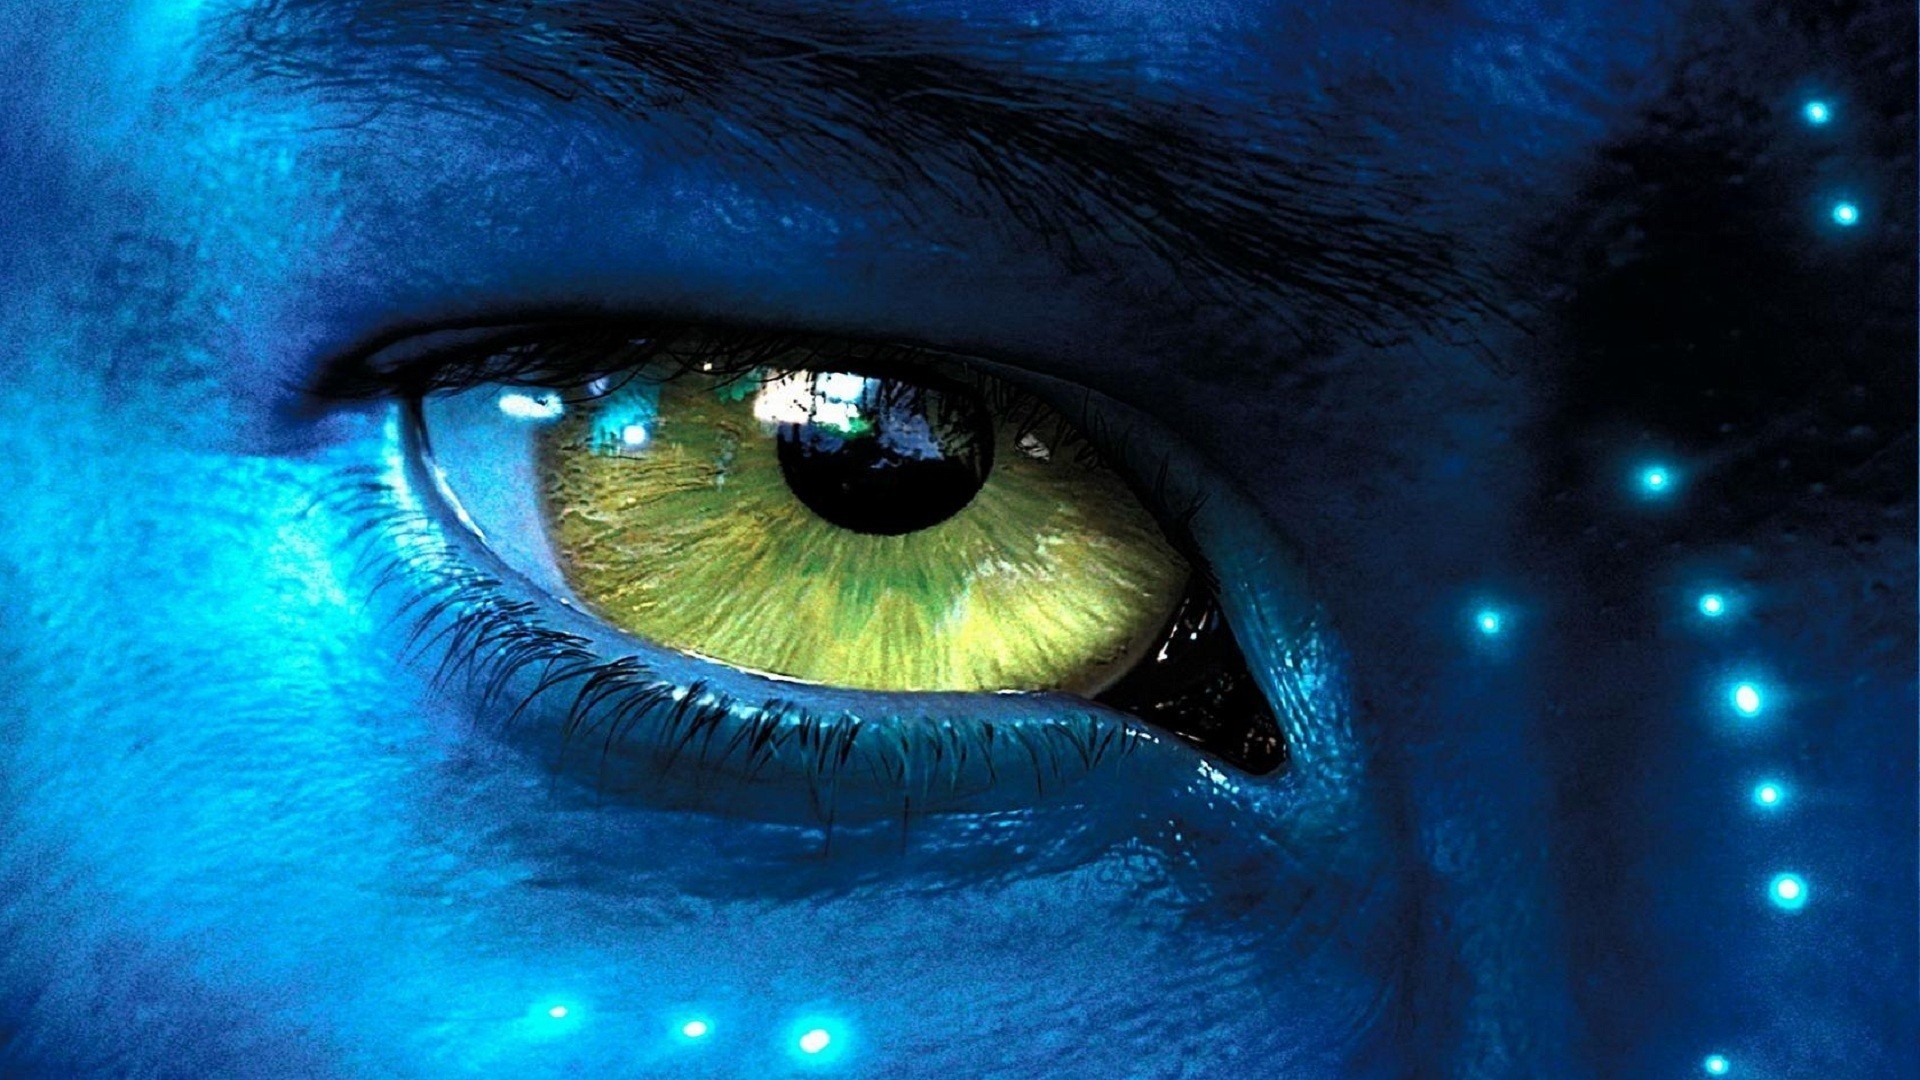 Image from the movie "Avatar"